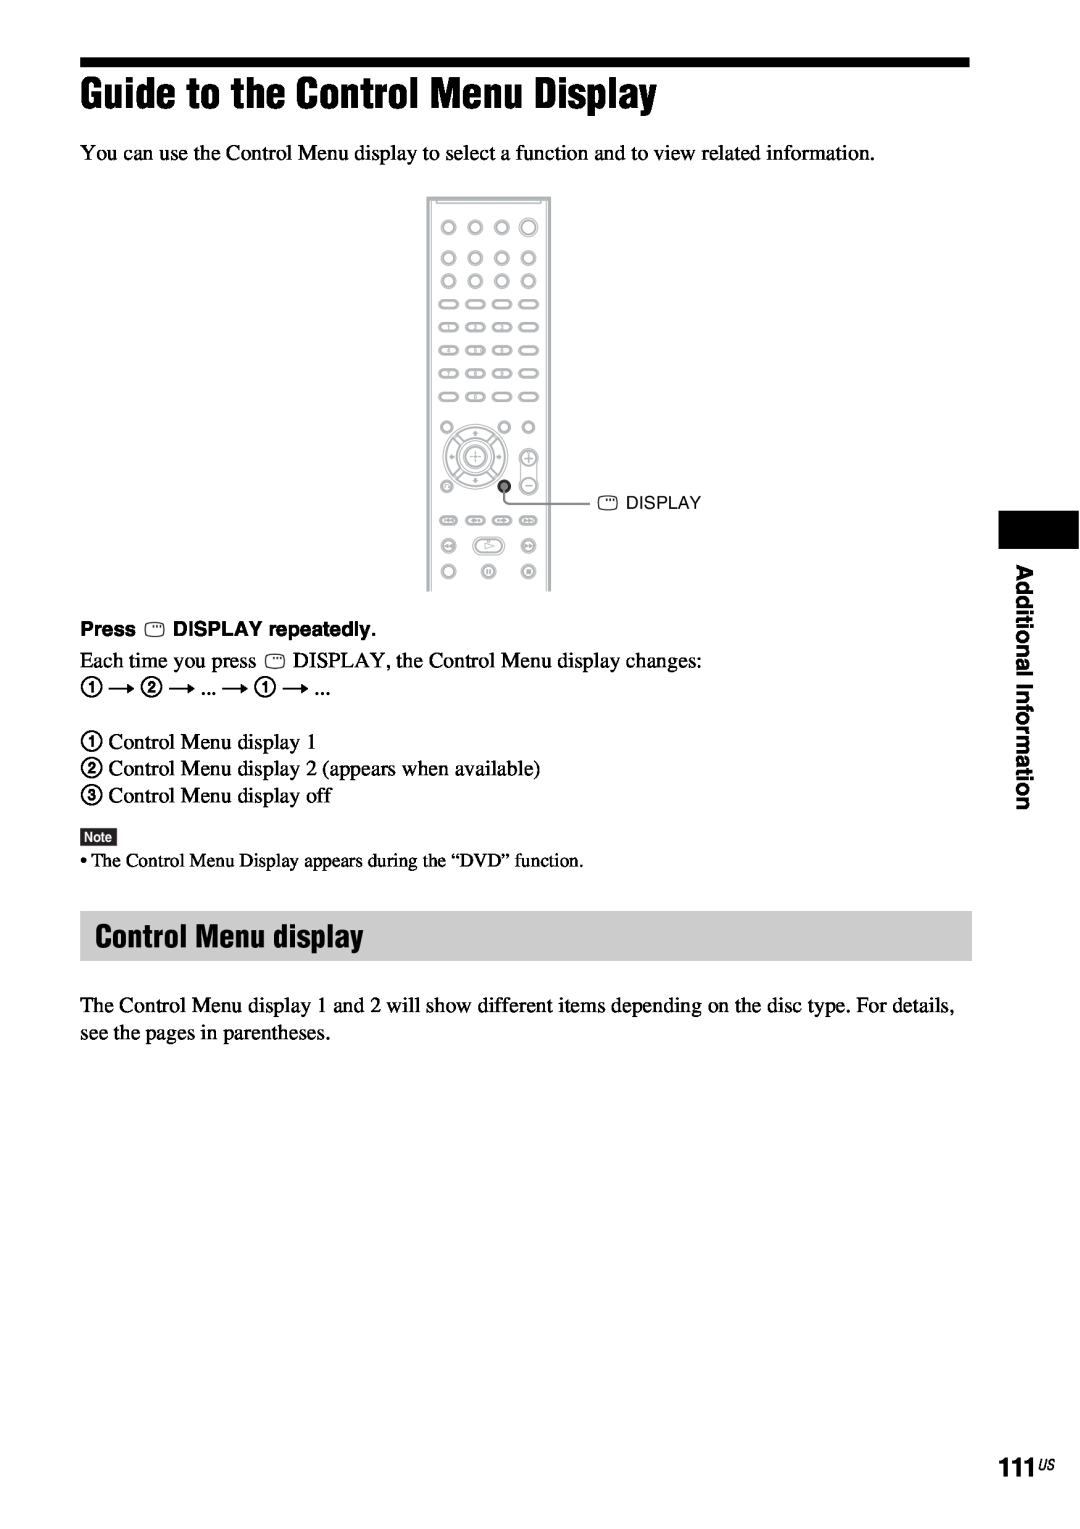 Sony DAV-HDX686W Guide to the Control Menu Display, Control Menu display, Additional Information, Press DISPLAY repeatedly 